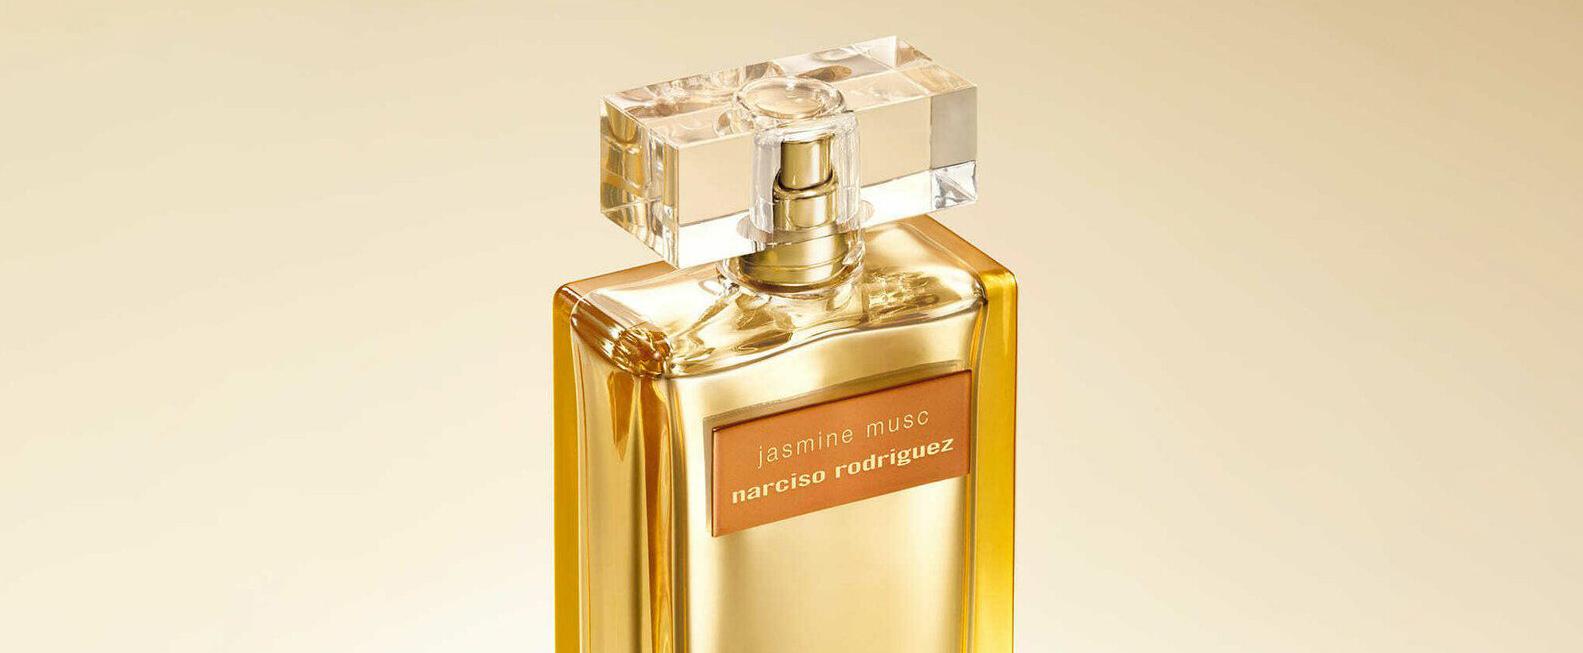 “Jasmine Musc” - Narciso Rodriguez Expands Musc Collection With Another Fragrance